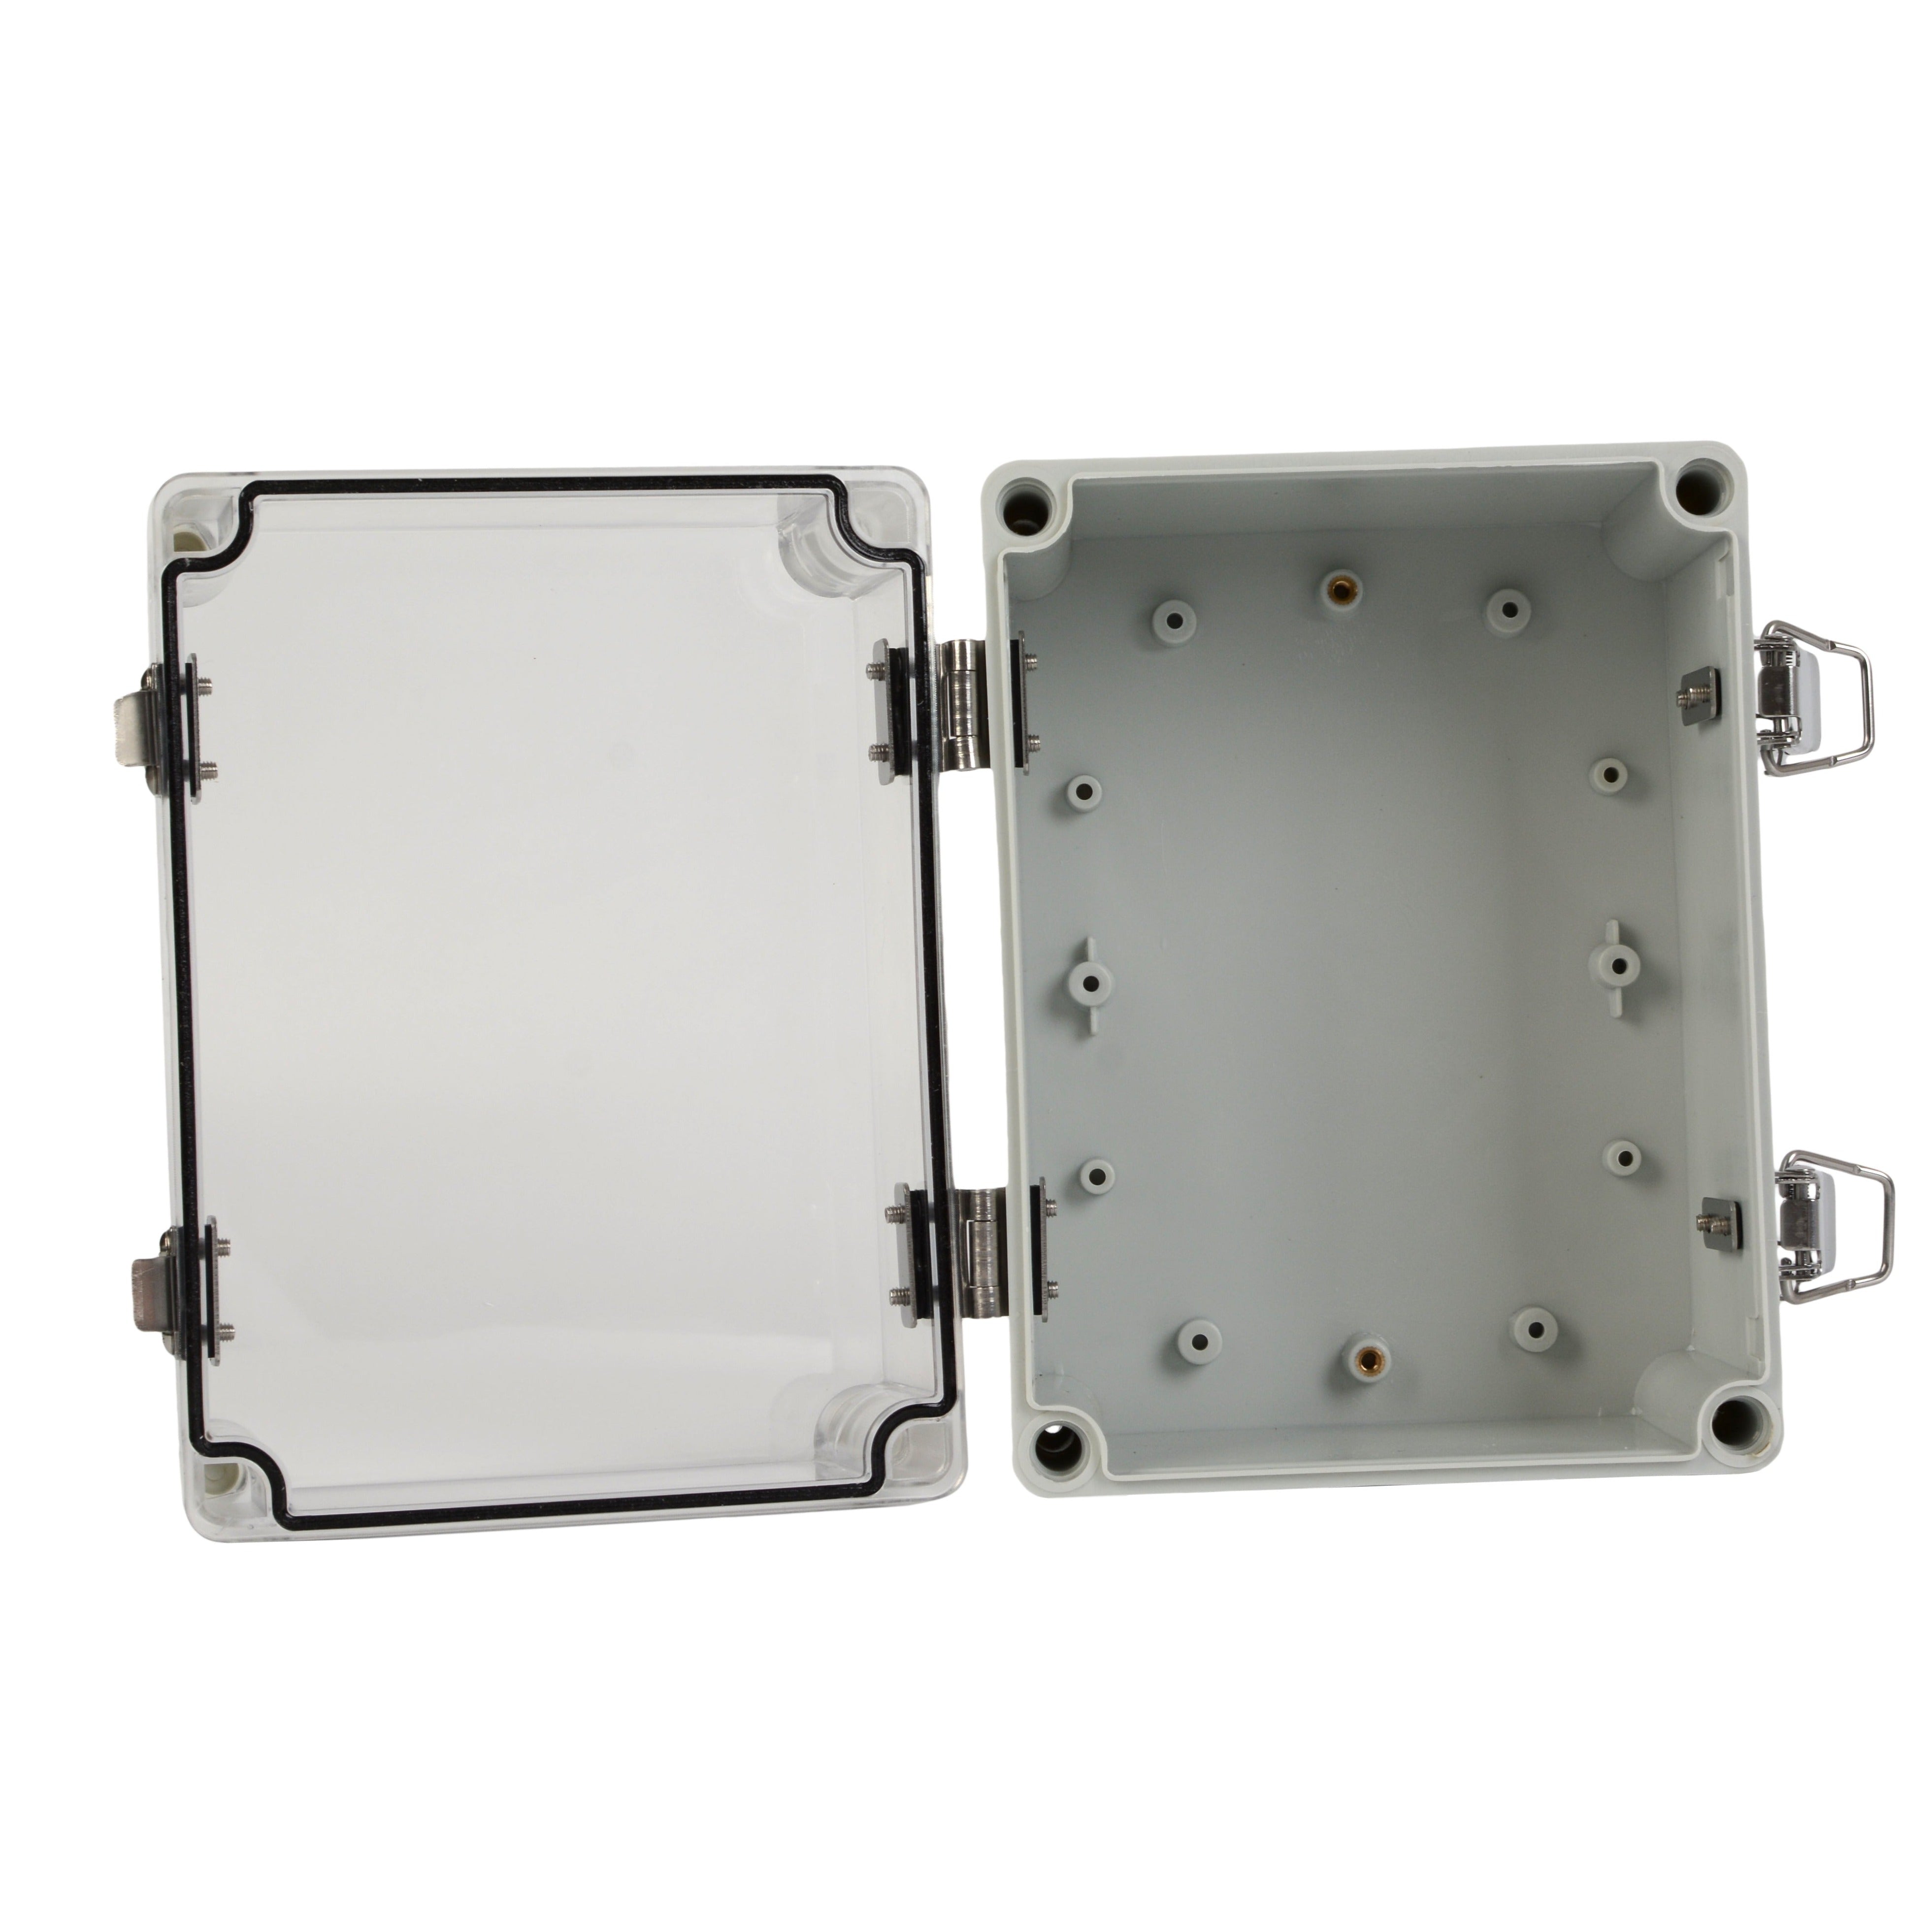 ABS IP66 Clear Lid Junction Box 150 x 200 x 130mm